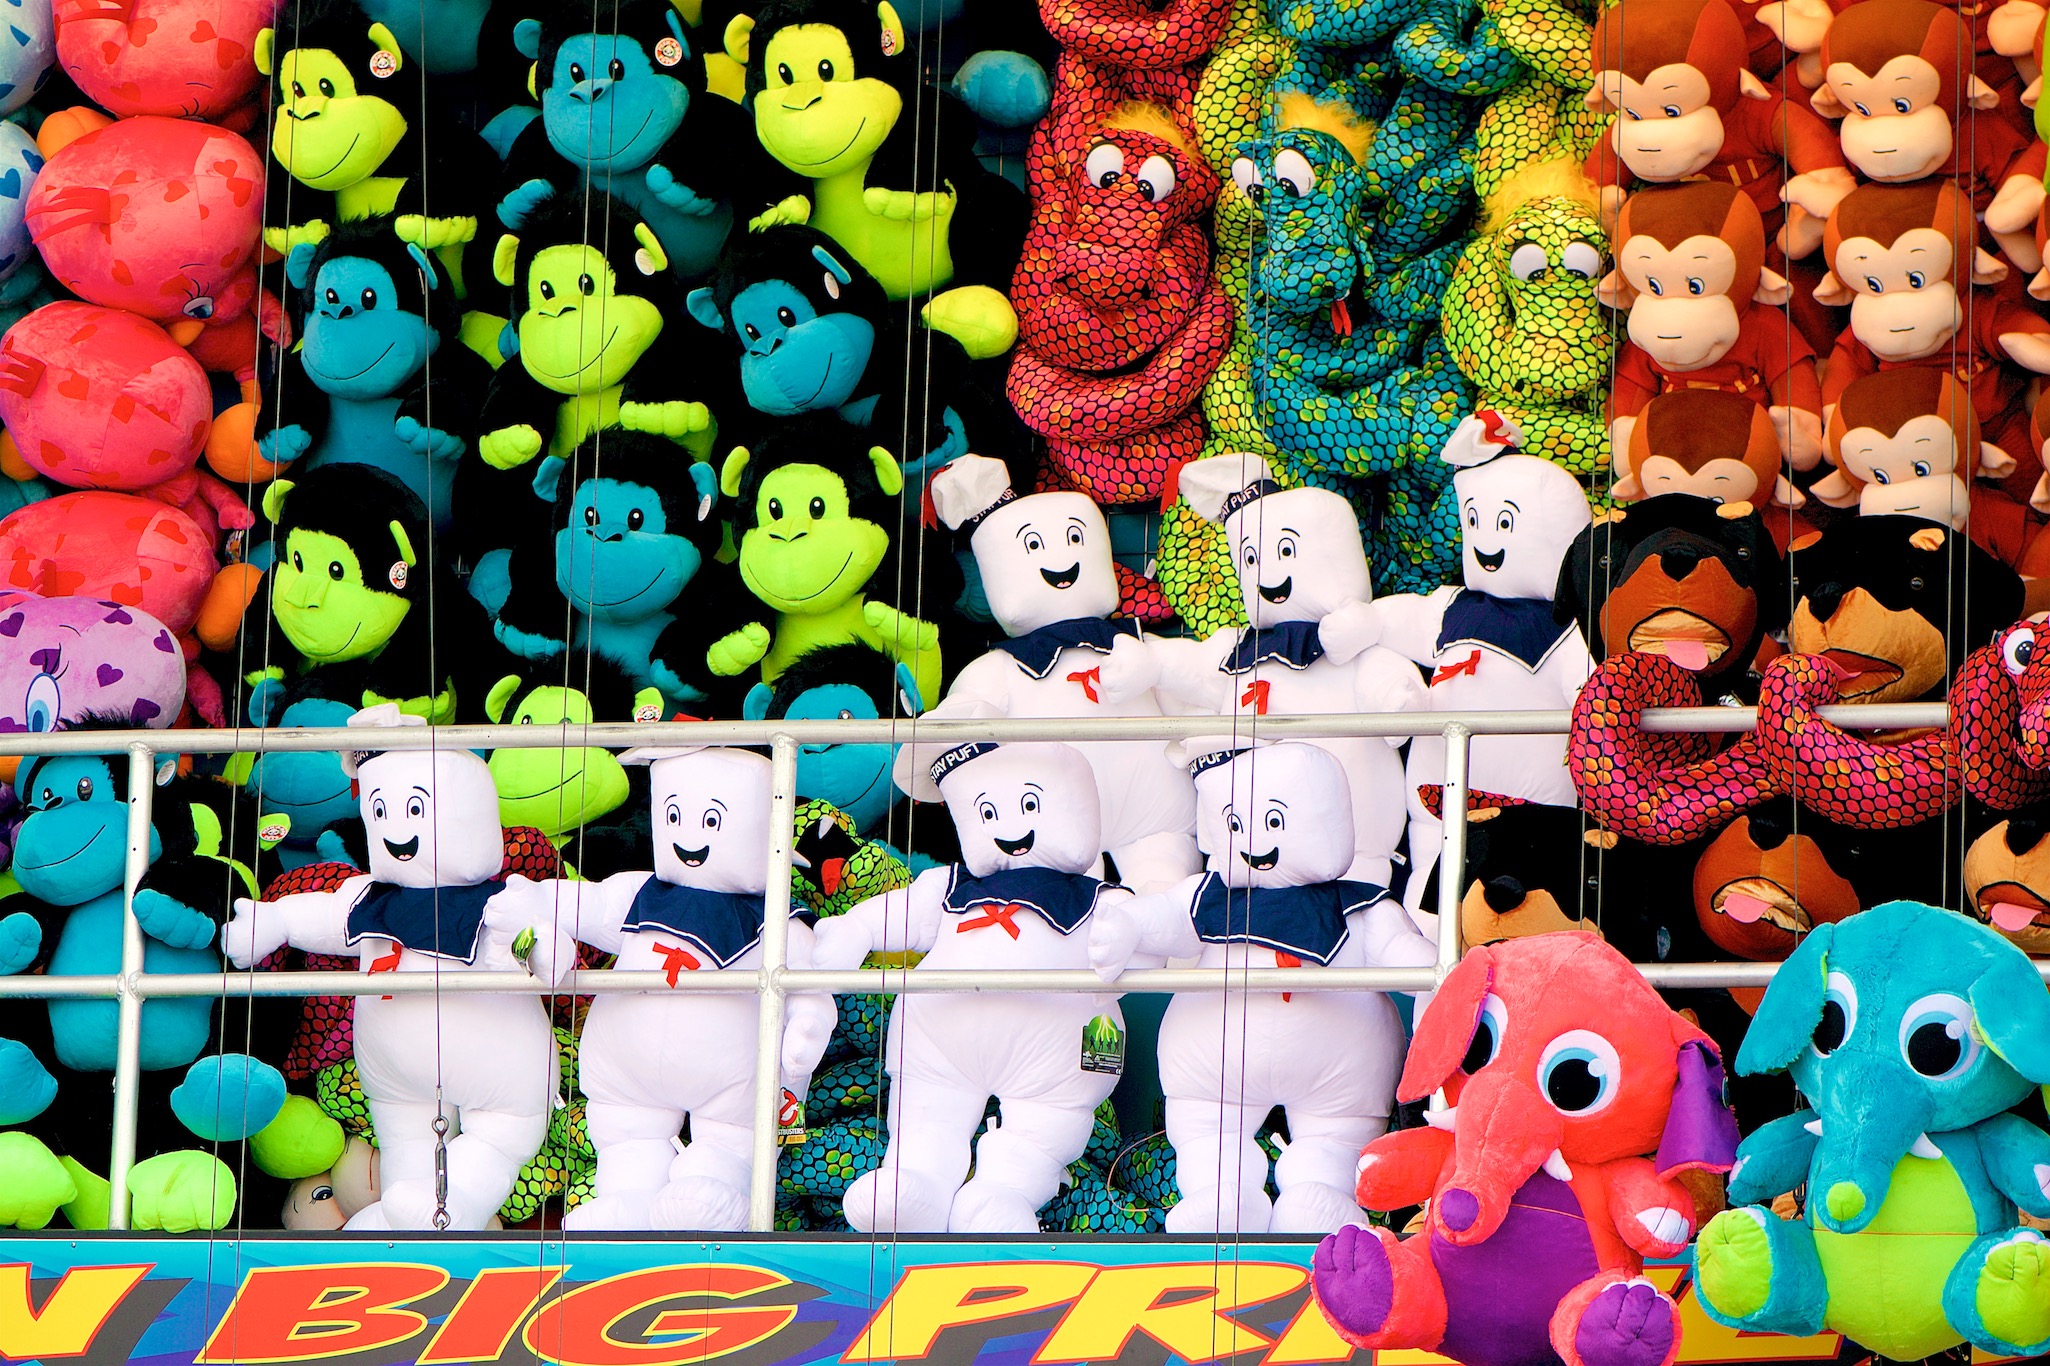 Prizes at the New York State Fair in Syracuse, New York